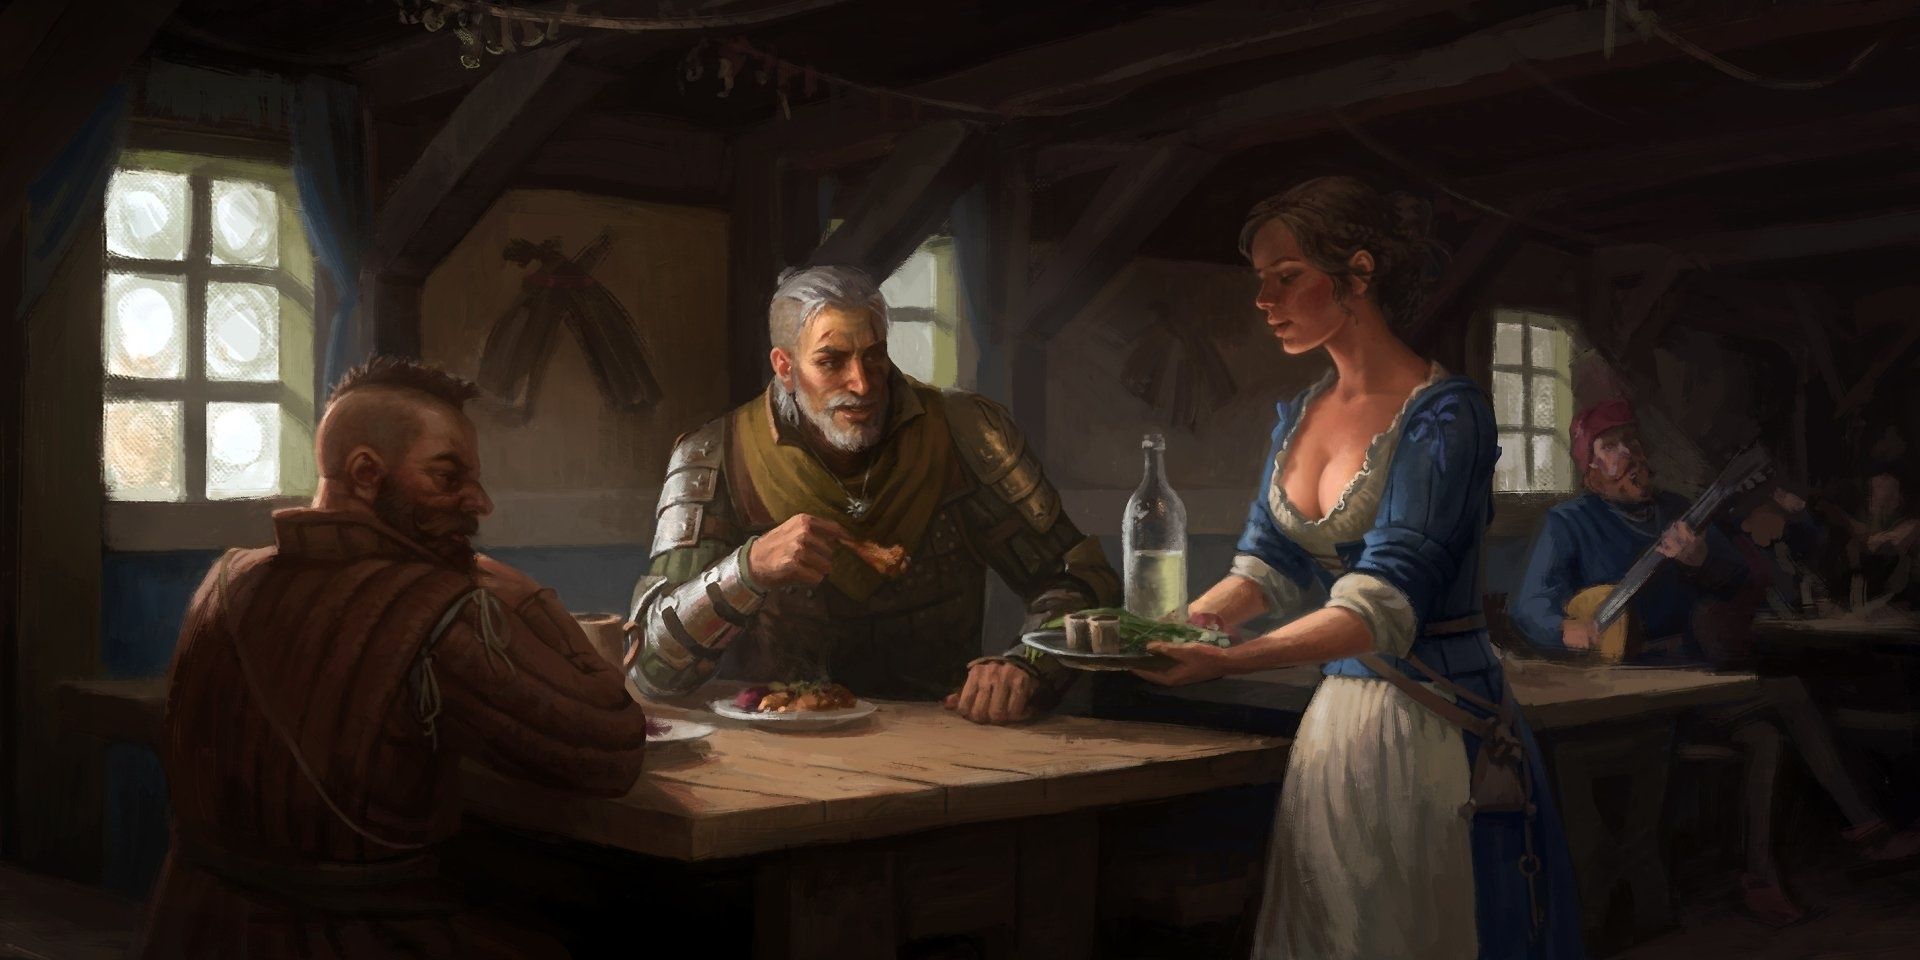 Zoltan and Geralt in The Witcher 3